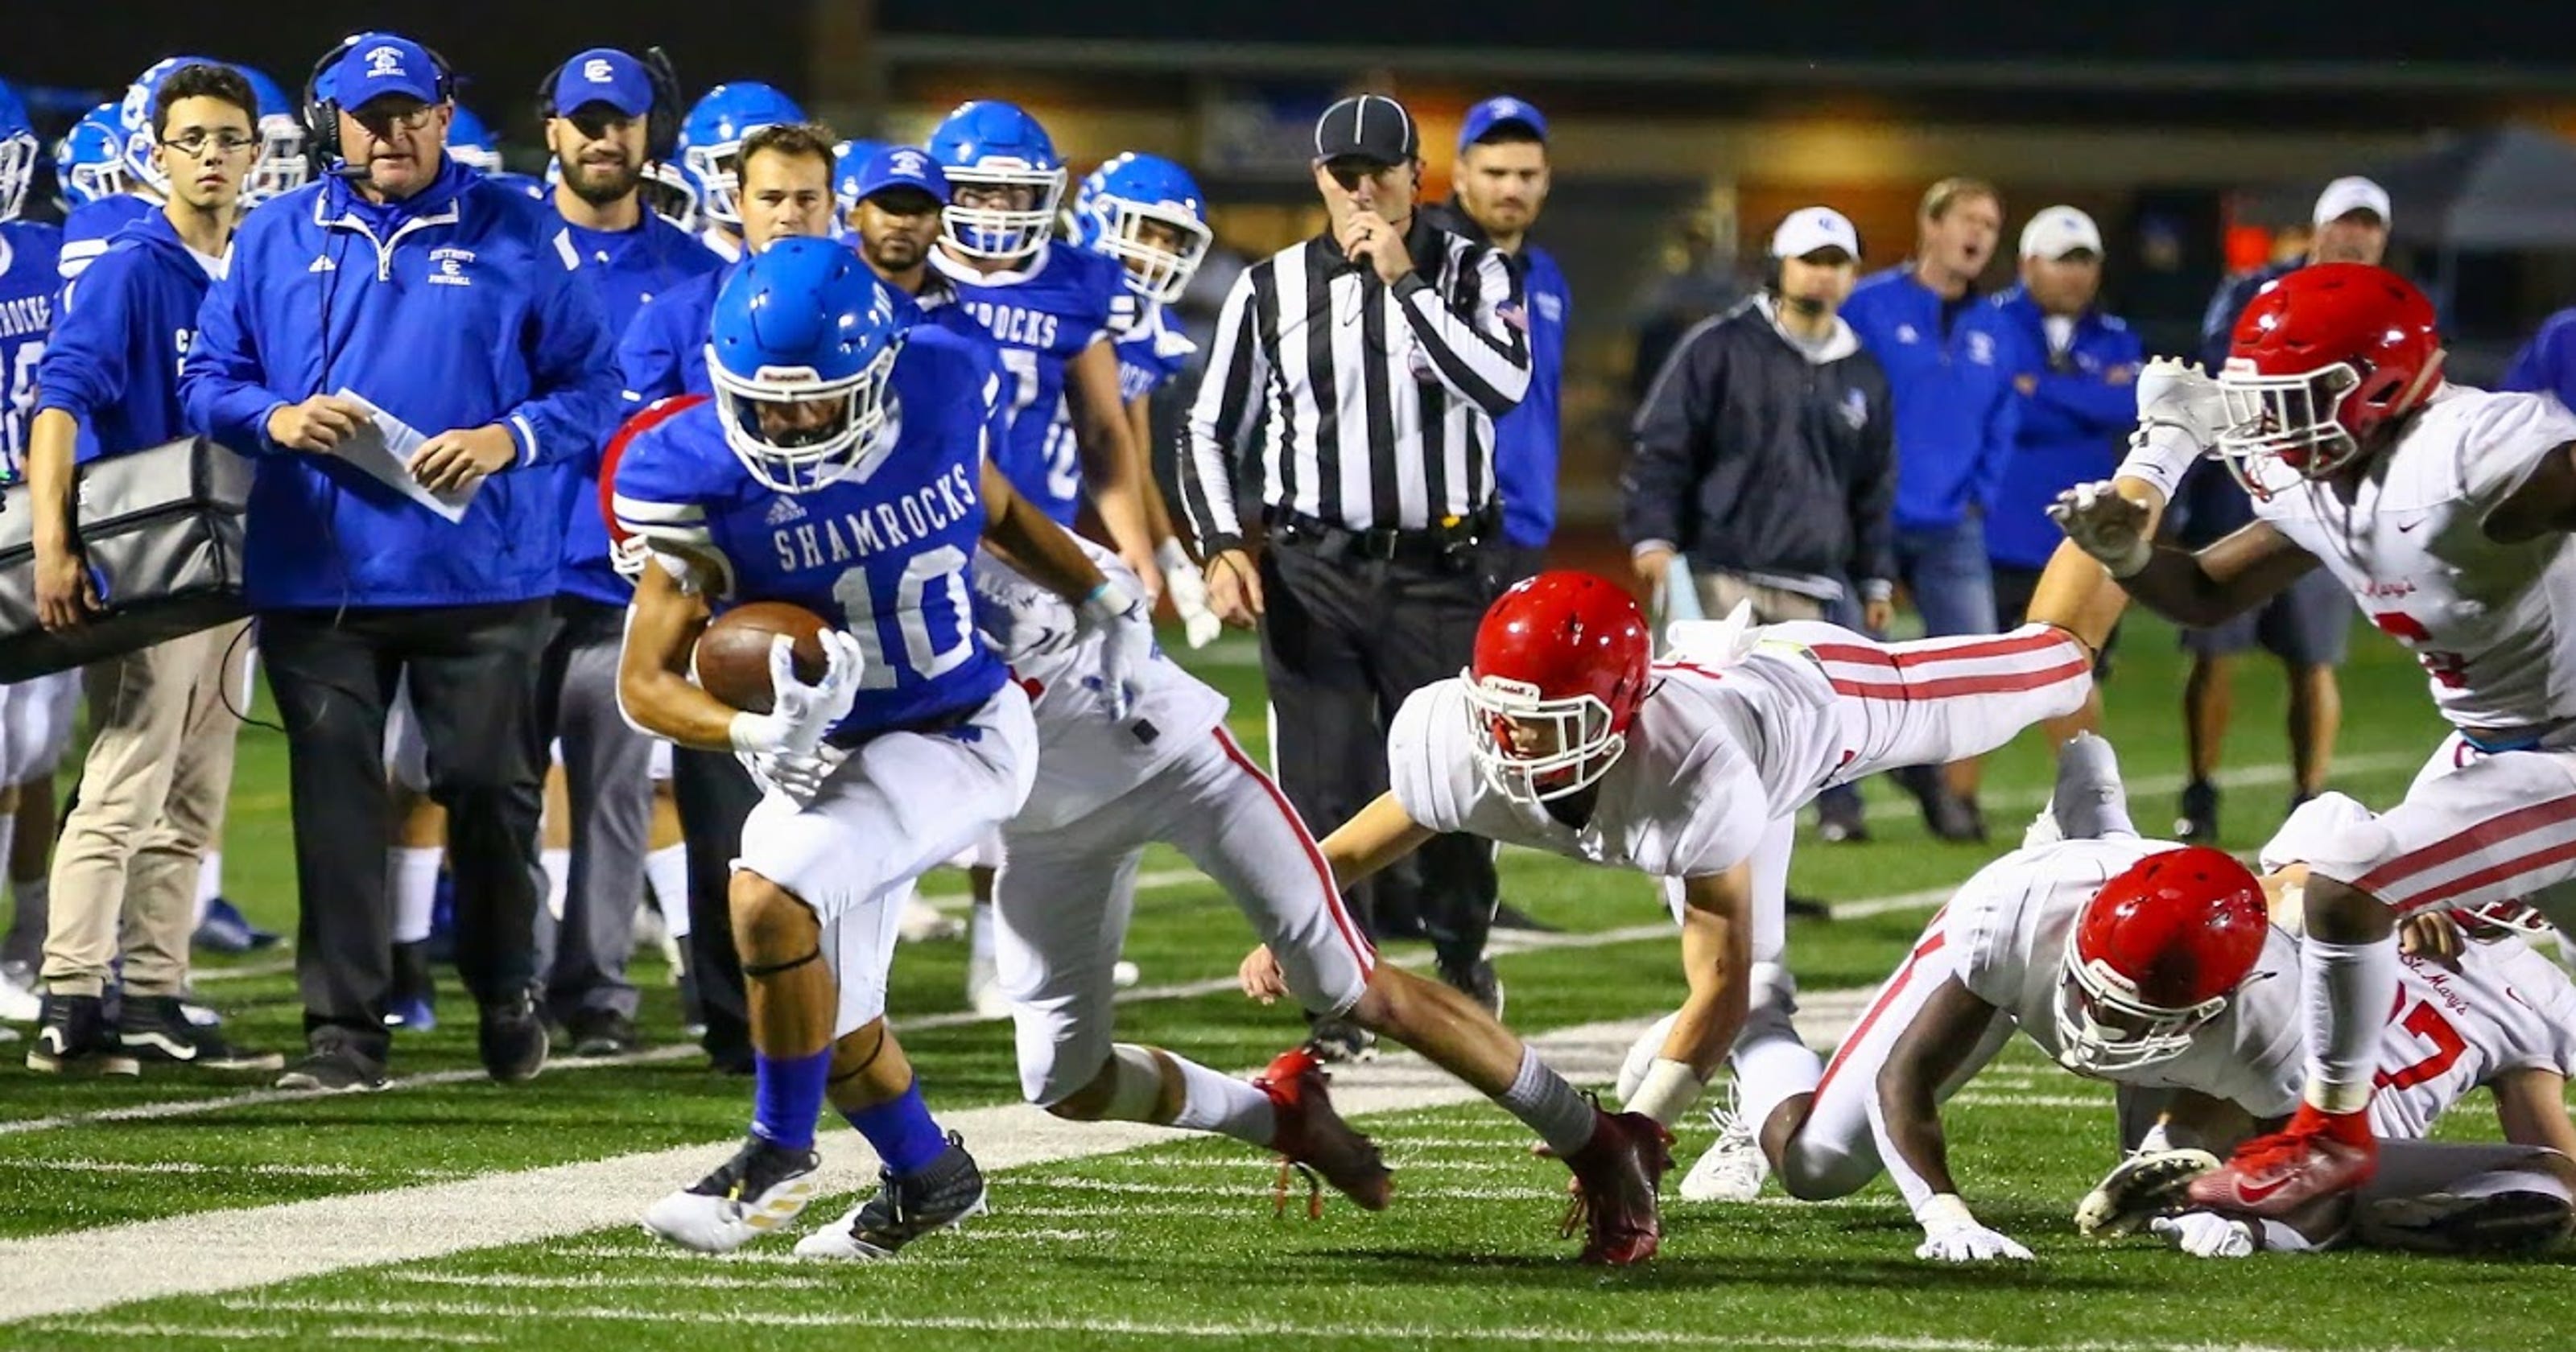 Detroit Catholic Central in playoff hunt after senior night win